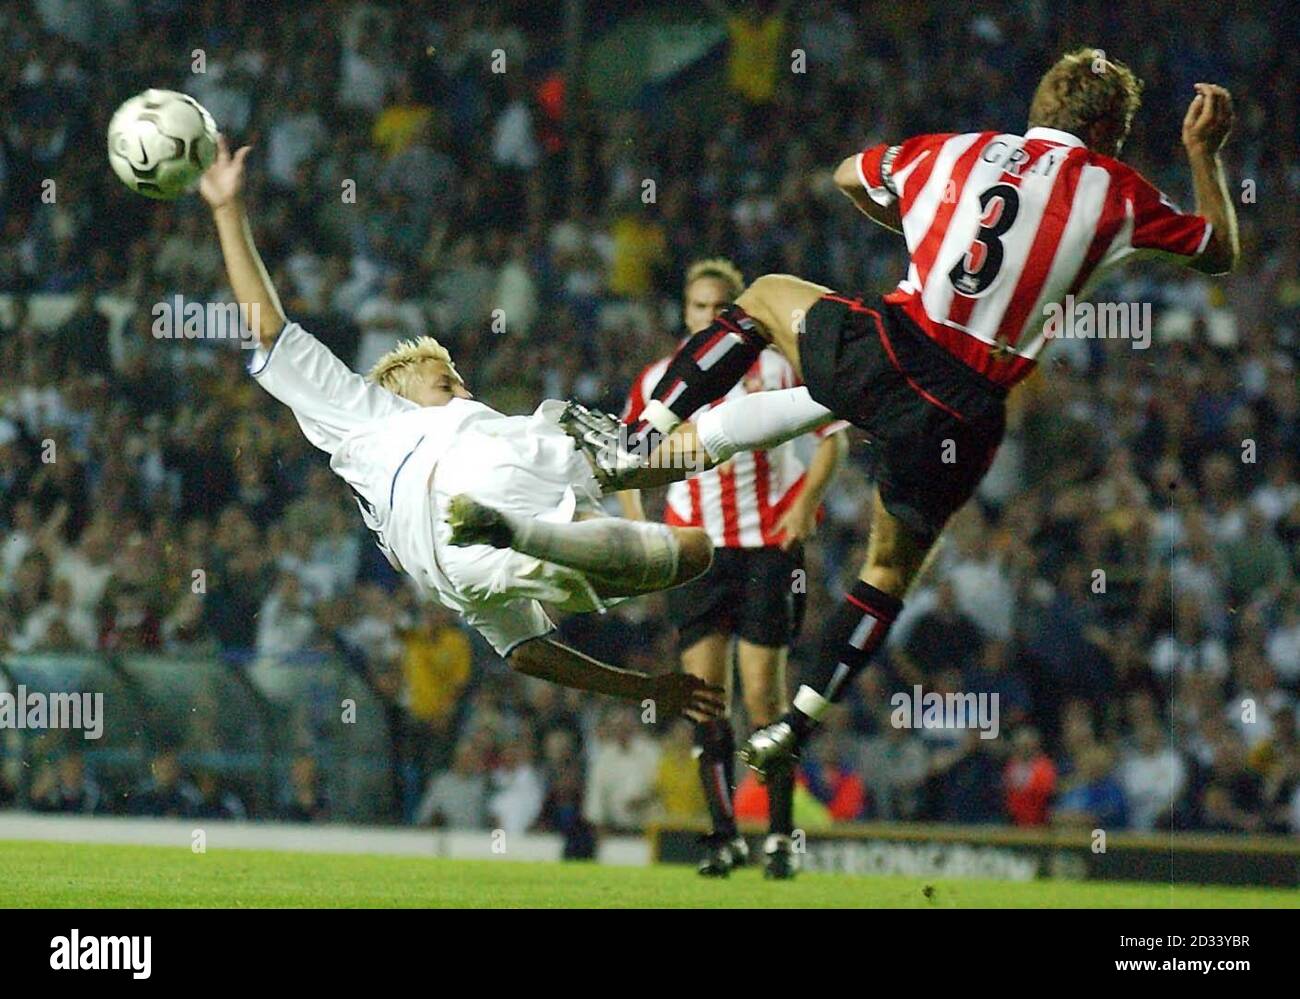 Leeds United's Alan Smith (left) collides with Sunderland's Michael Gray during the FA Barclaycard Premiership game at Elland Road, Leeds. Sunderland defeated Leeds United 1-0. Stock Photo